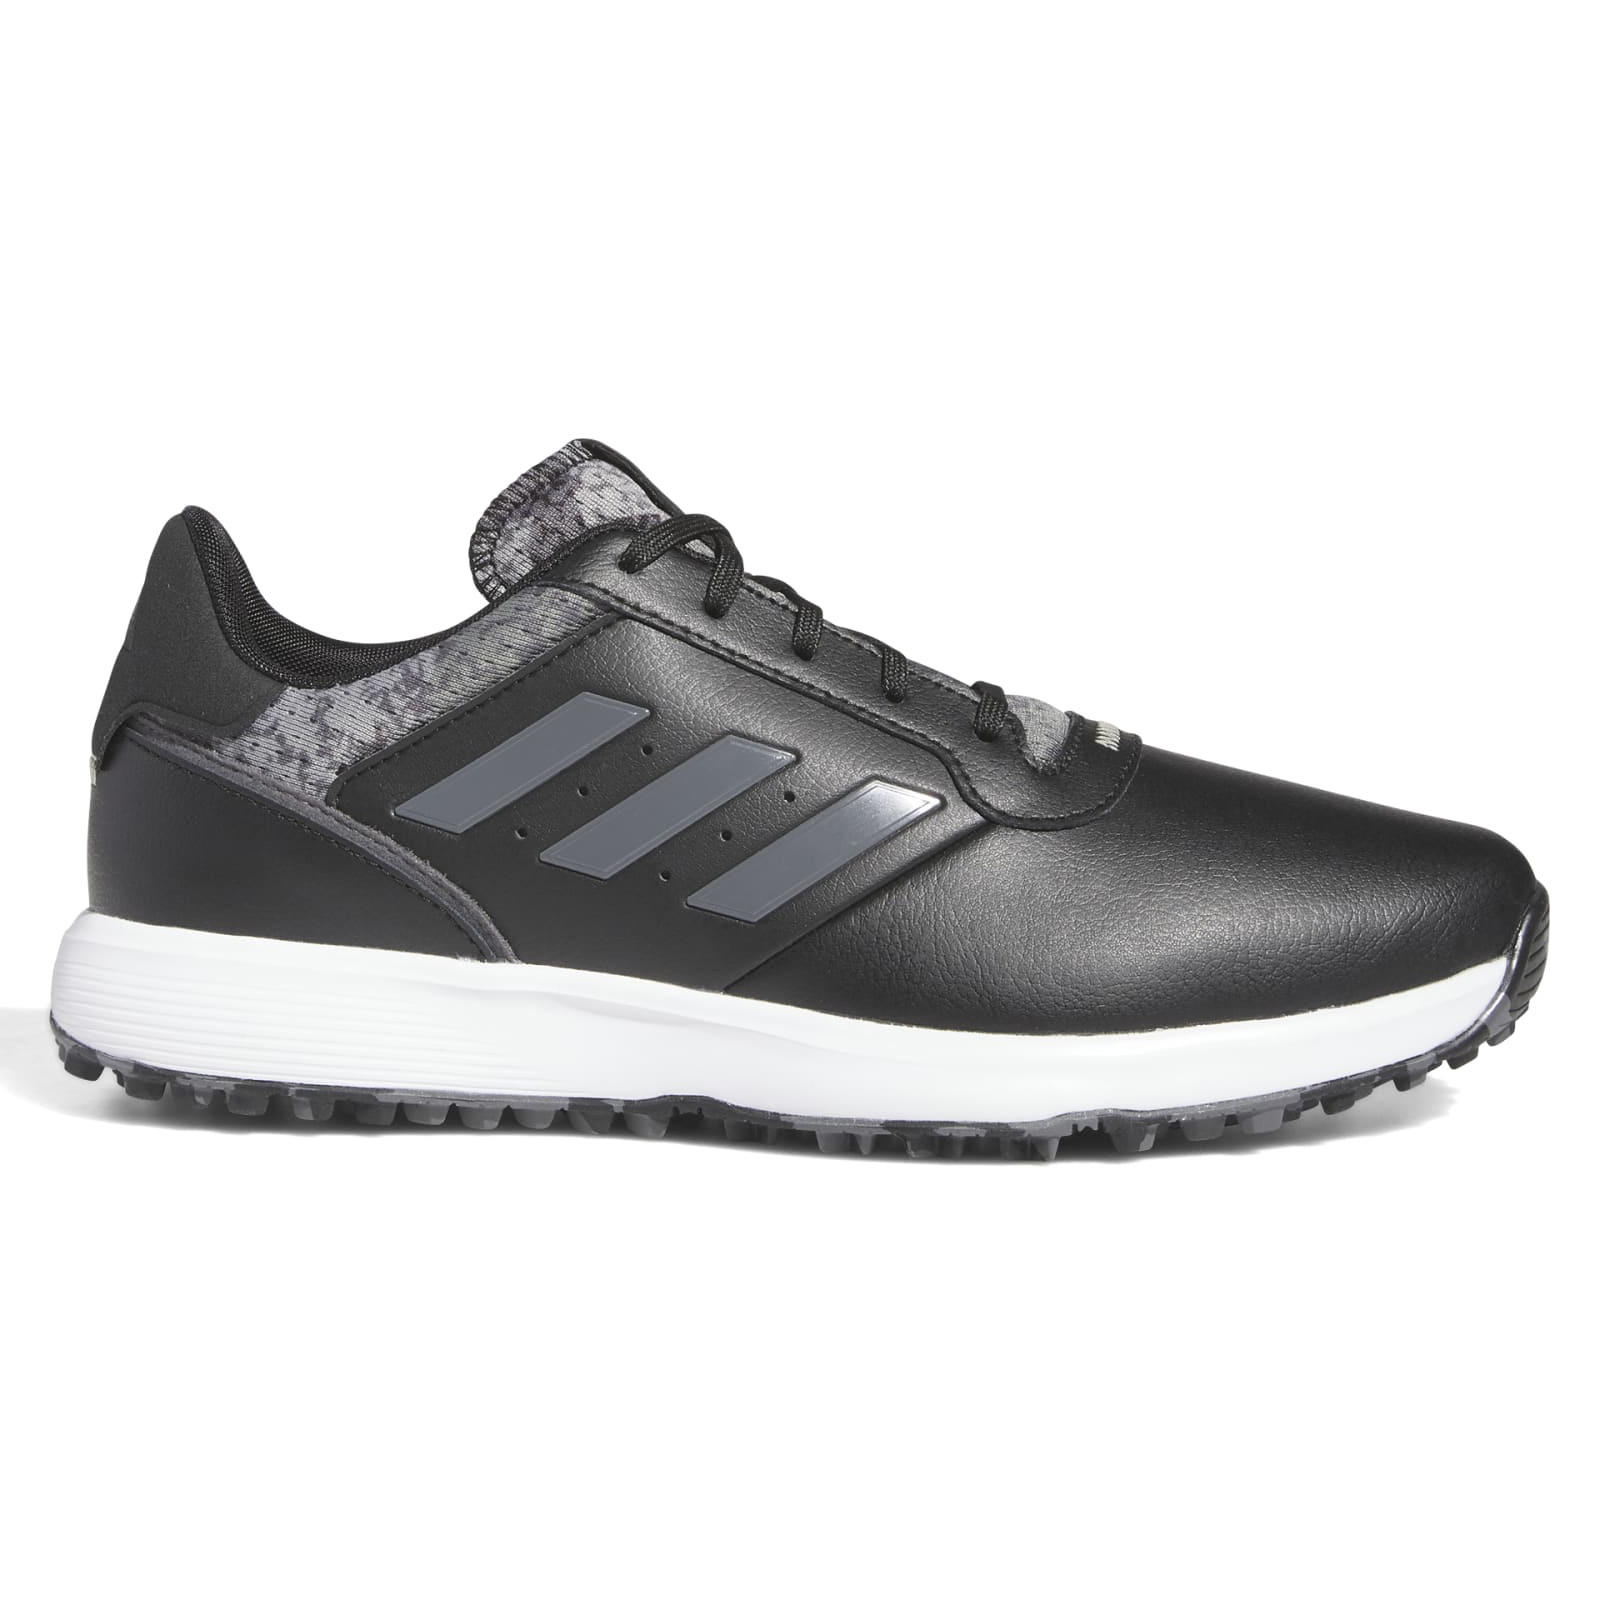 adidas S2G SL 23 Mens Spikeless Golf Shoes  - Core Black/Grey Five/Silver Pebble